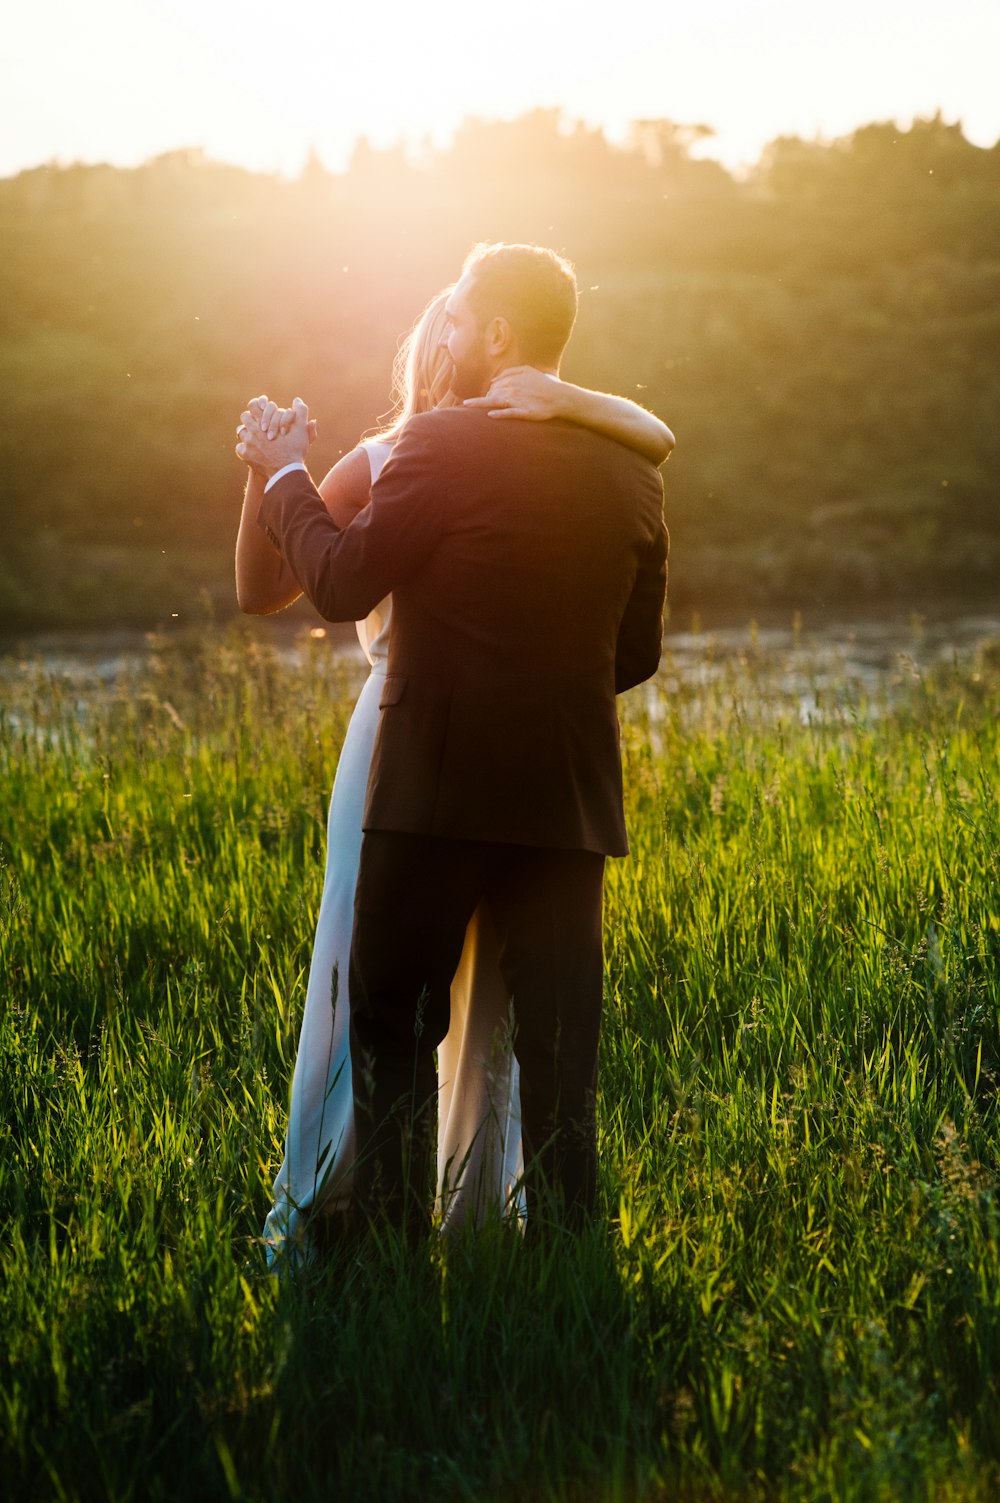 man and woman dancing on green grass field